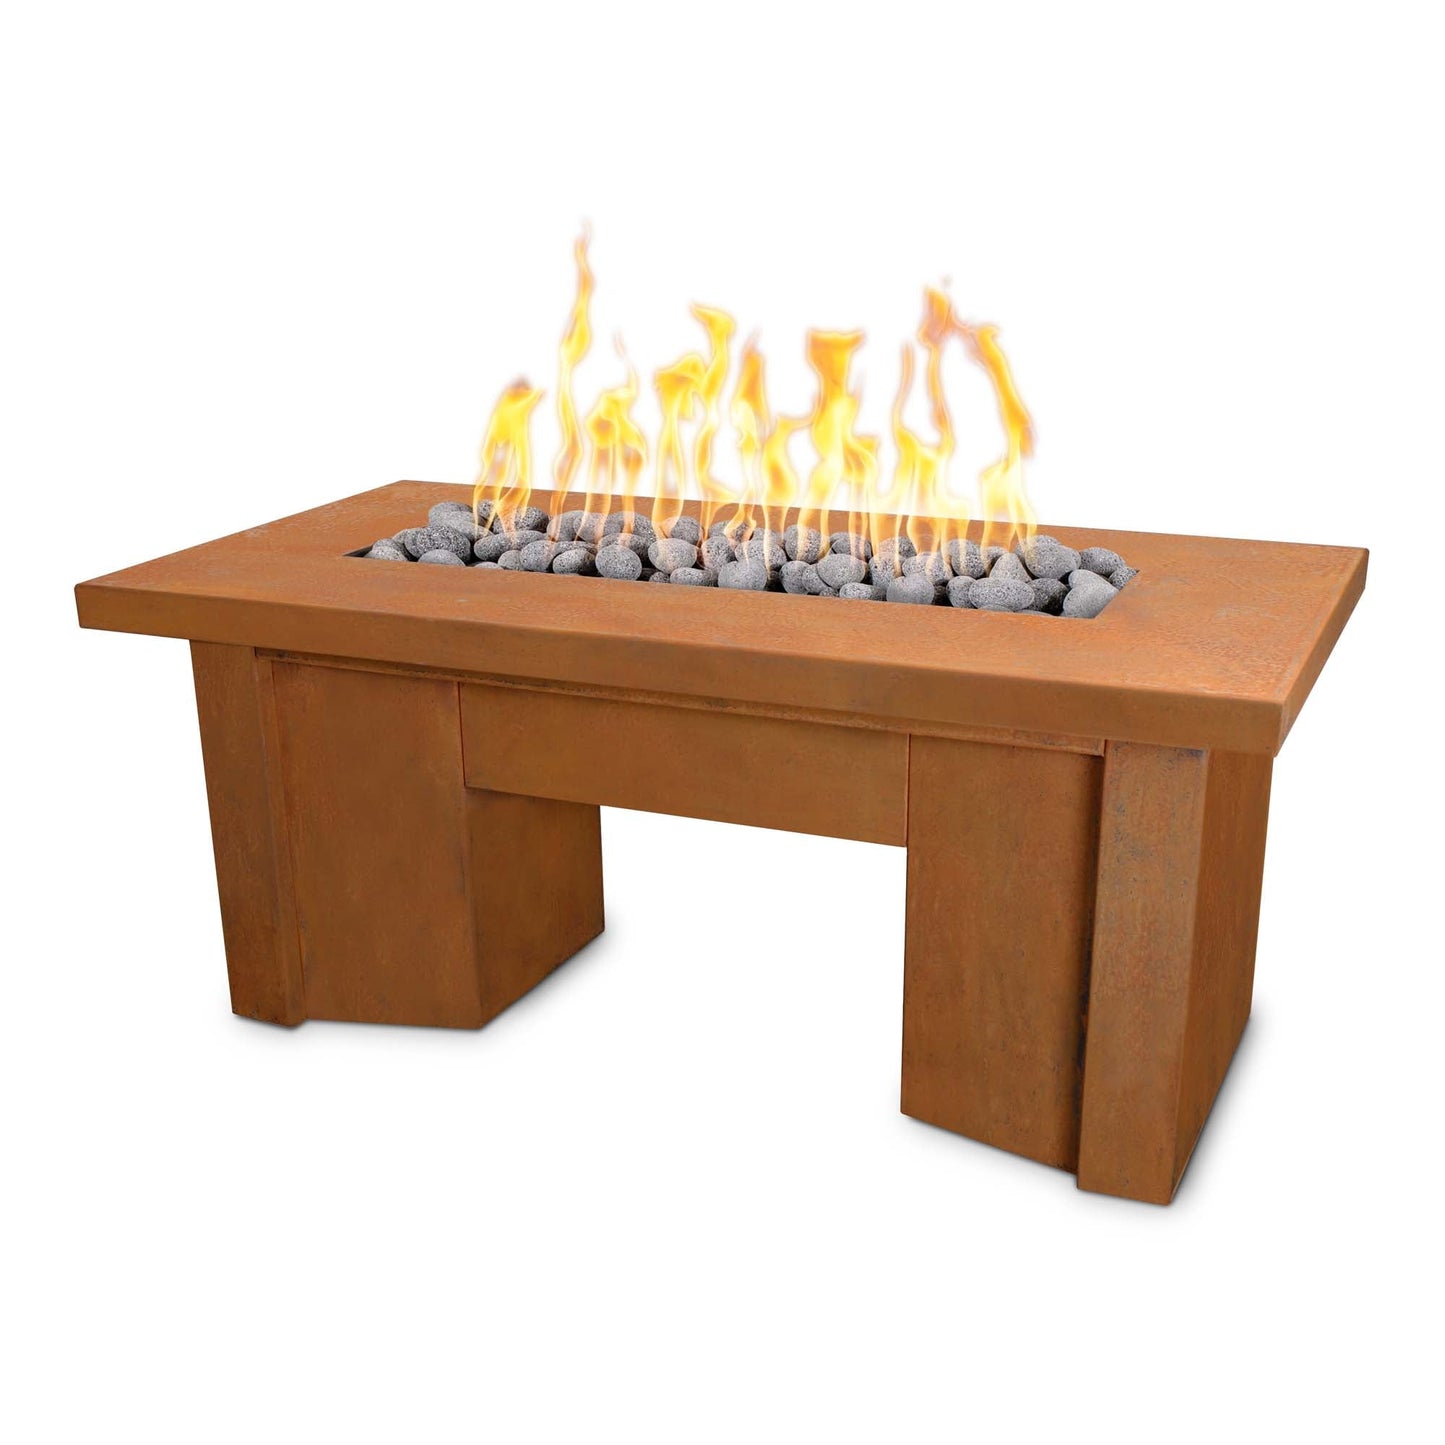 The Outdoor Plus Rectangular Alameda 48" Corten Steel Liquid Propane Fire Pit with Flame Sense with Spark Ignition